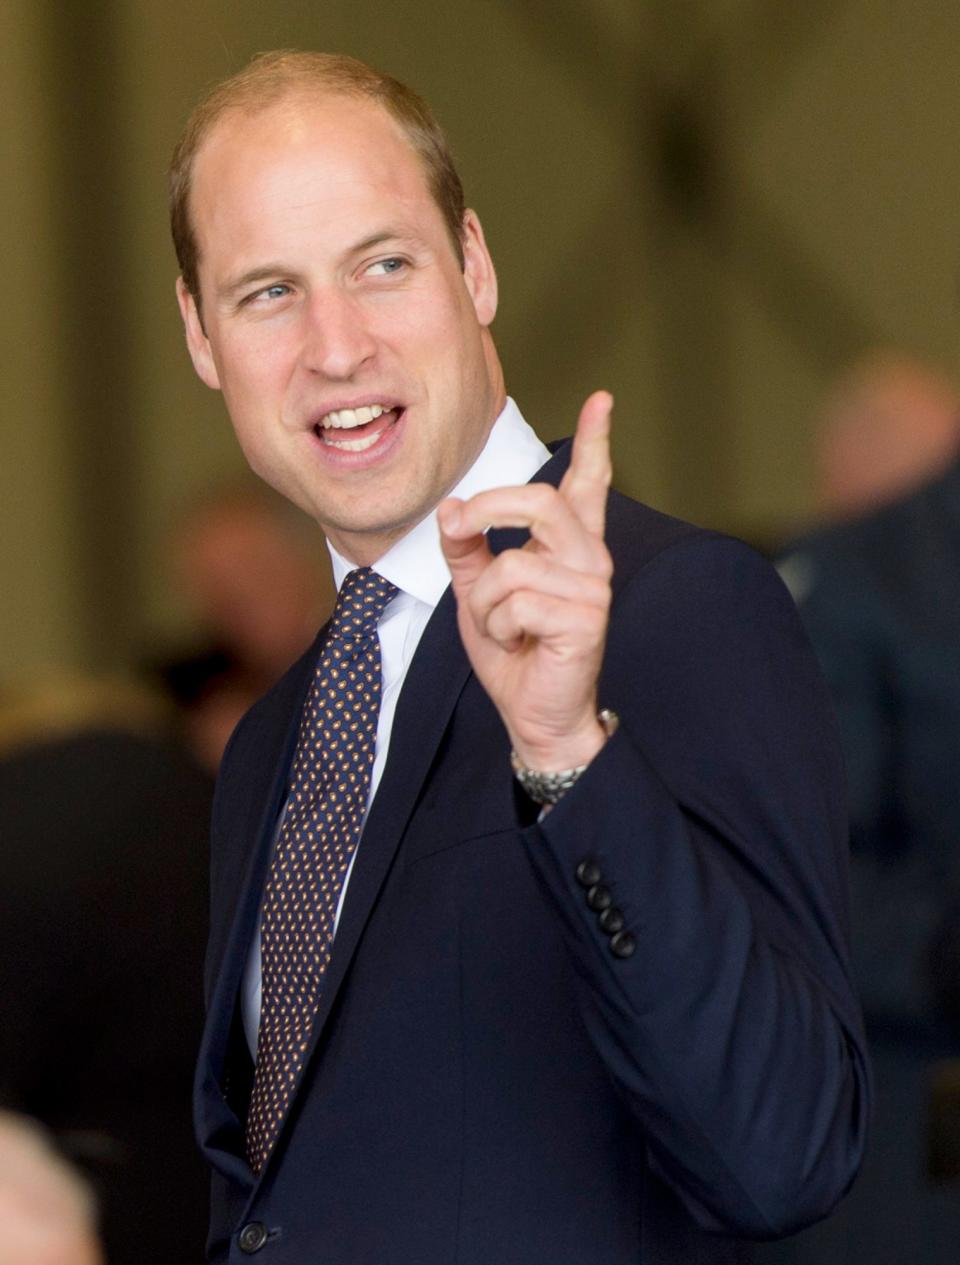 Hey Kids, Maybe Prince William Shouldn't Be the Soccer Goalie